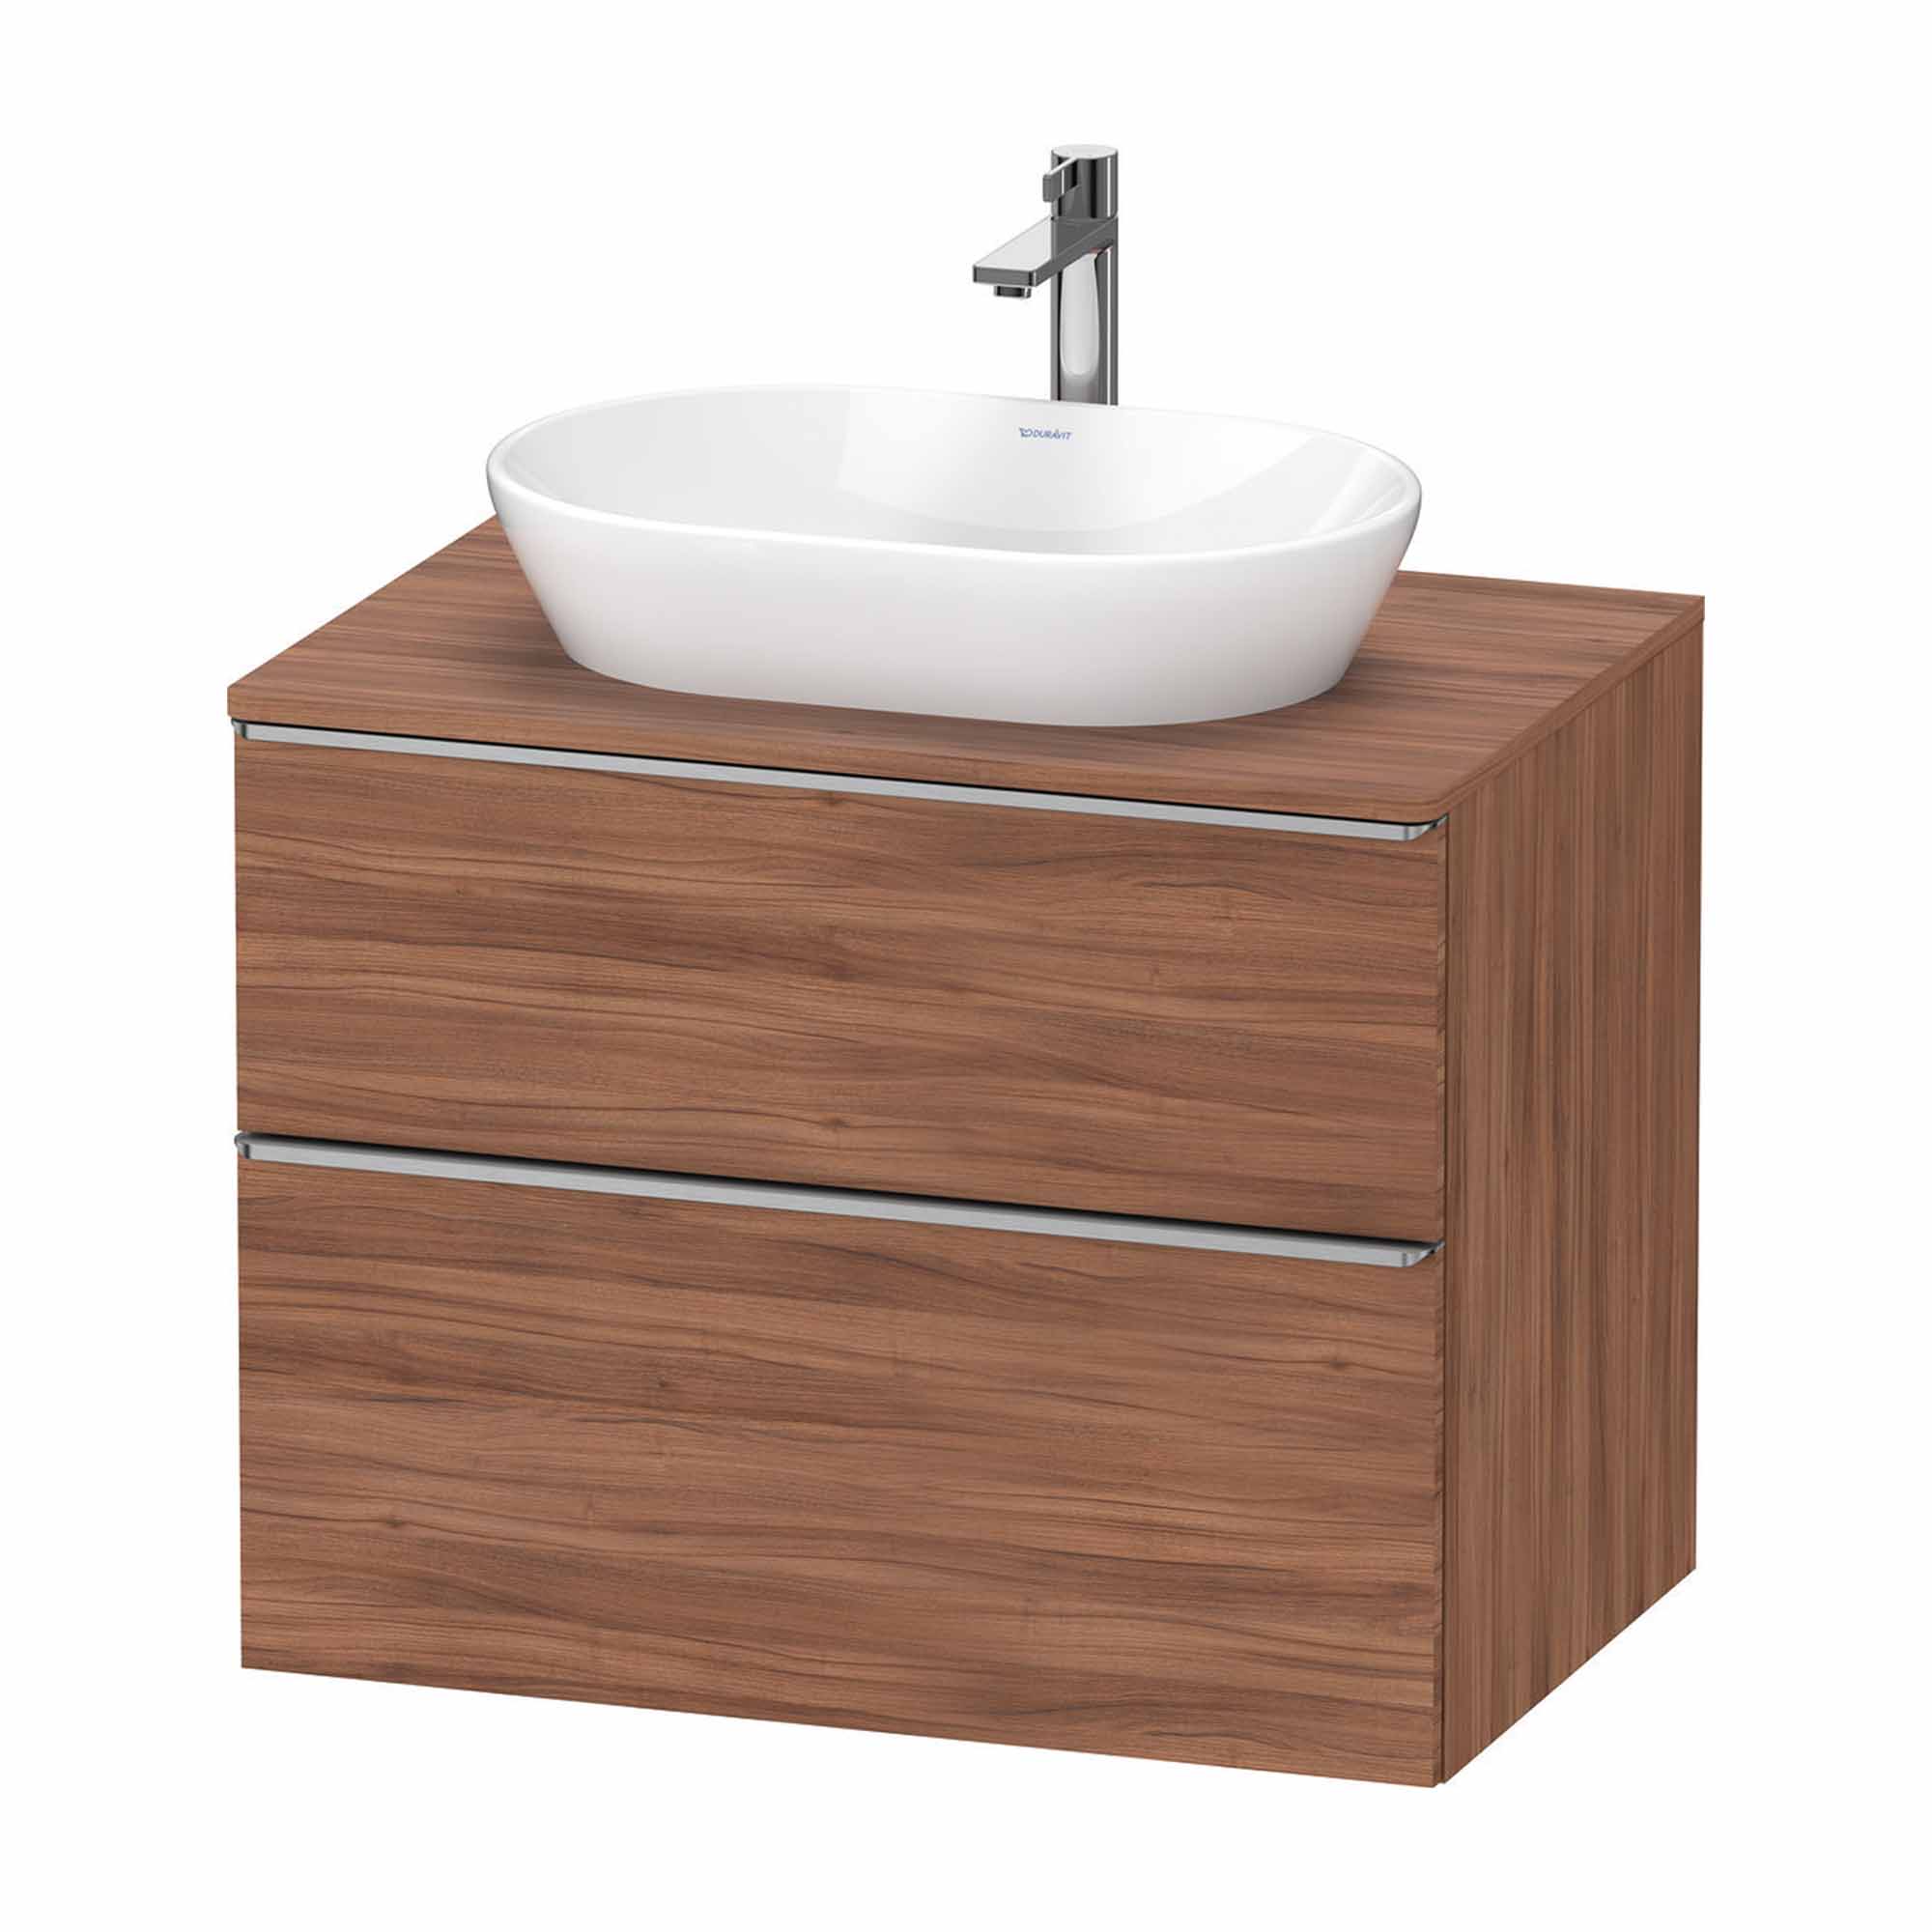 duravit d-neo 800 wall mounted vanity unit with-worktop walnut stainless steel handles